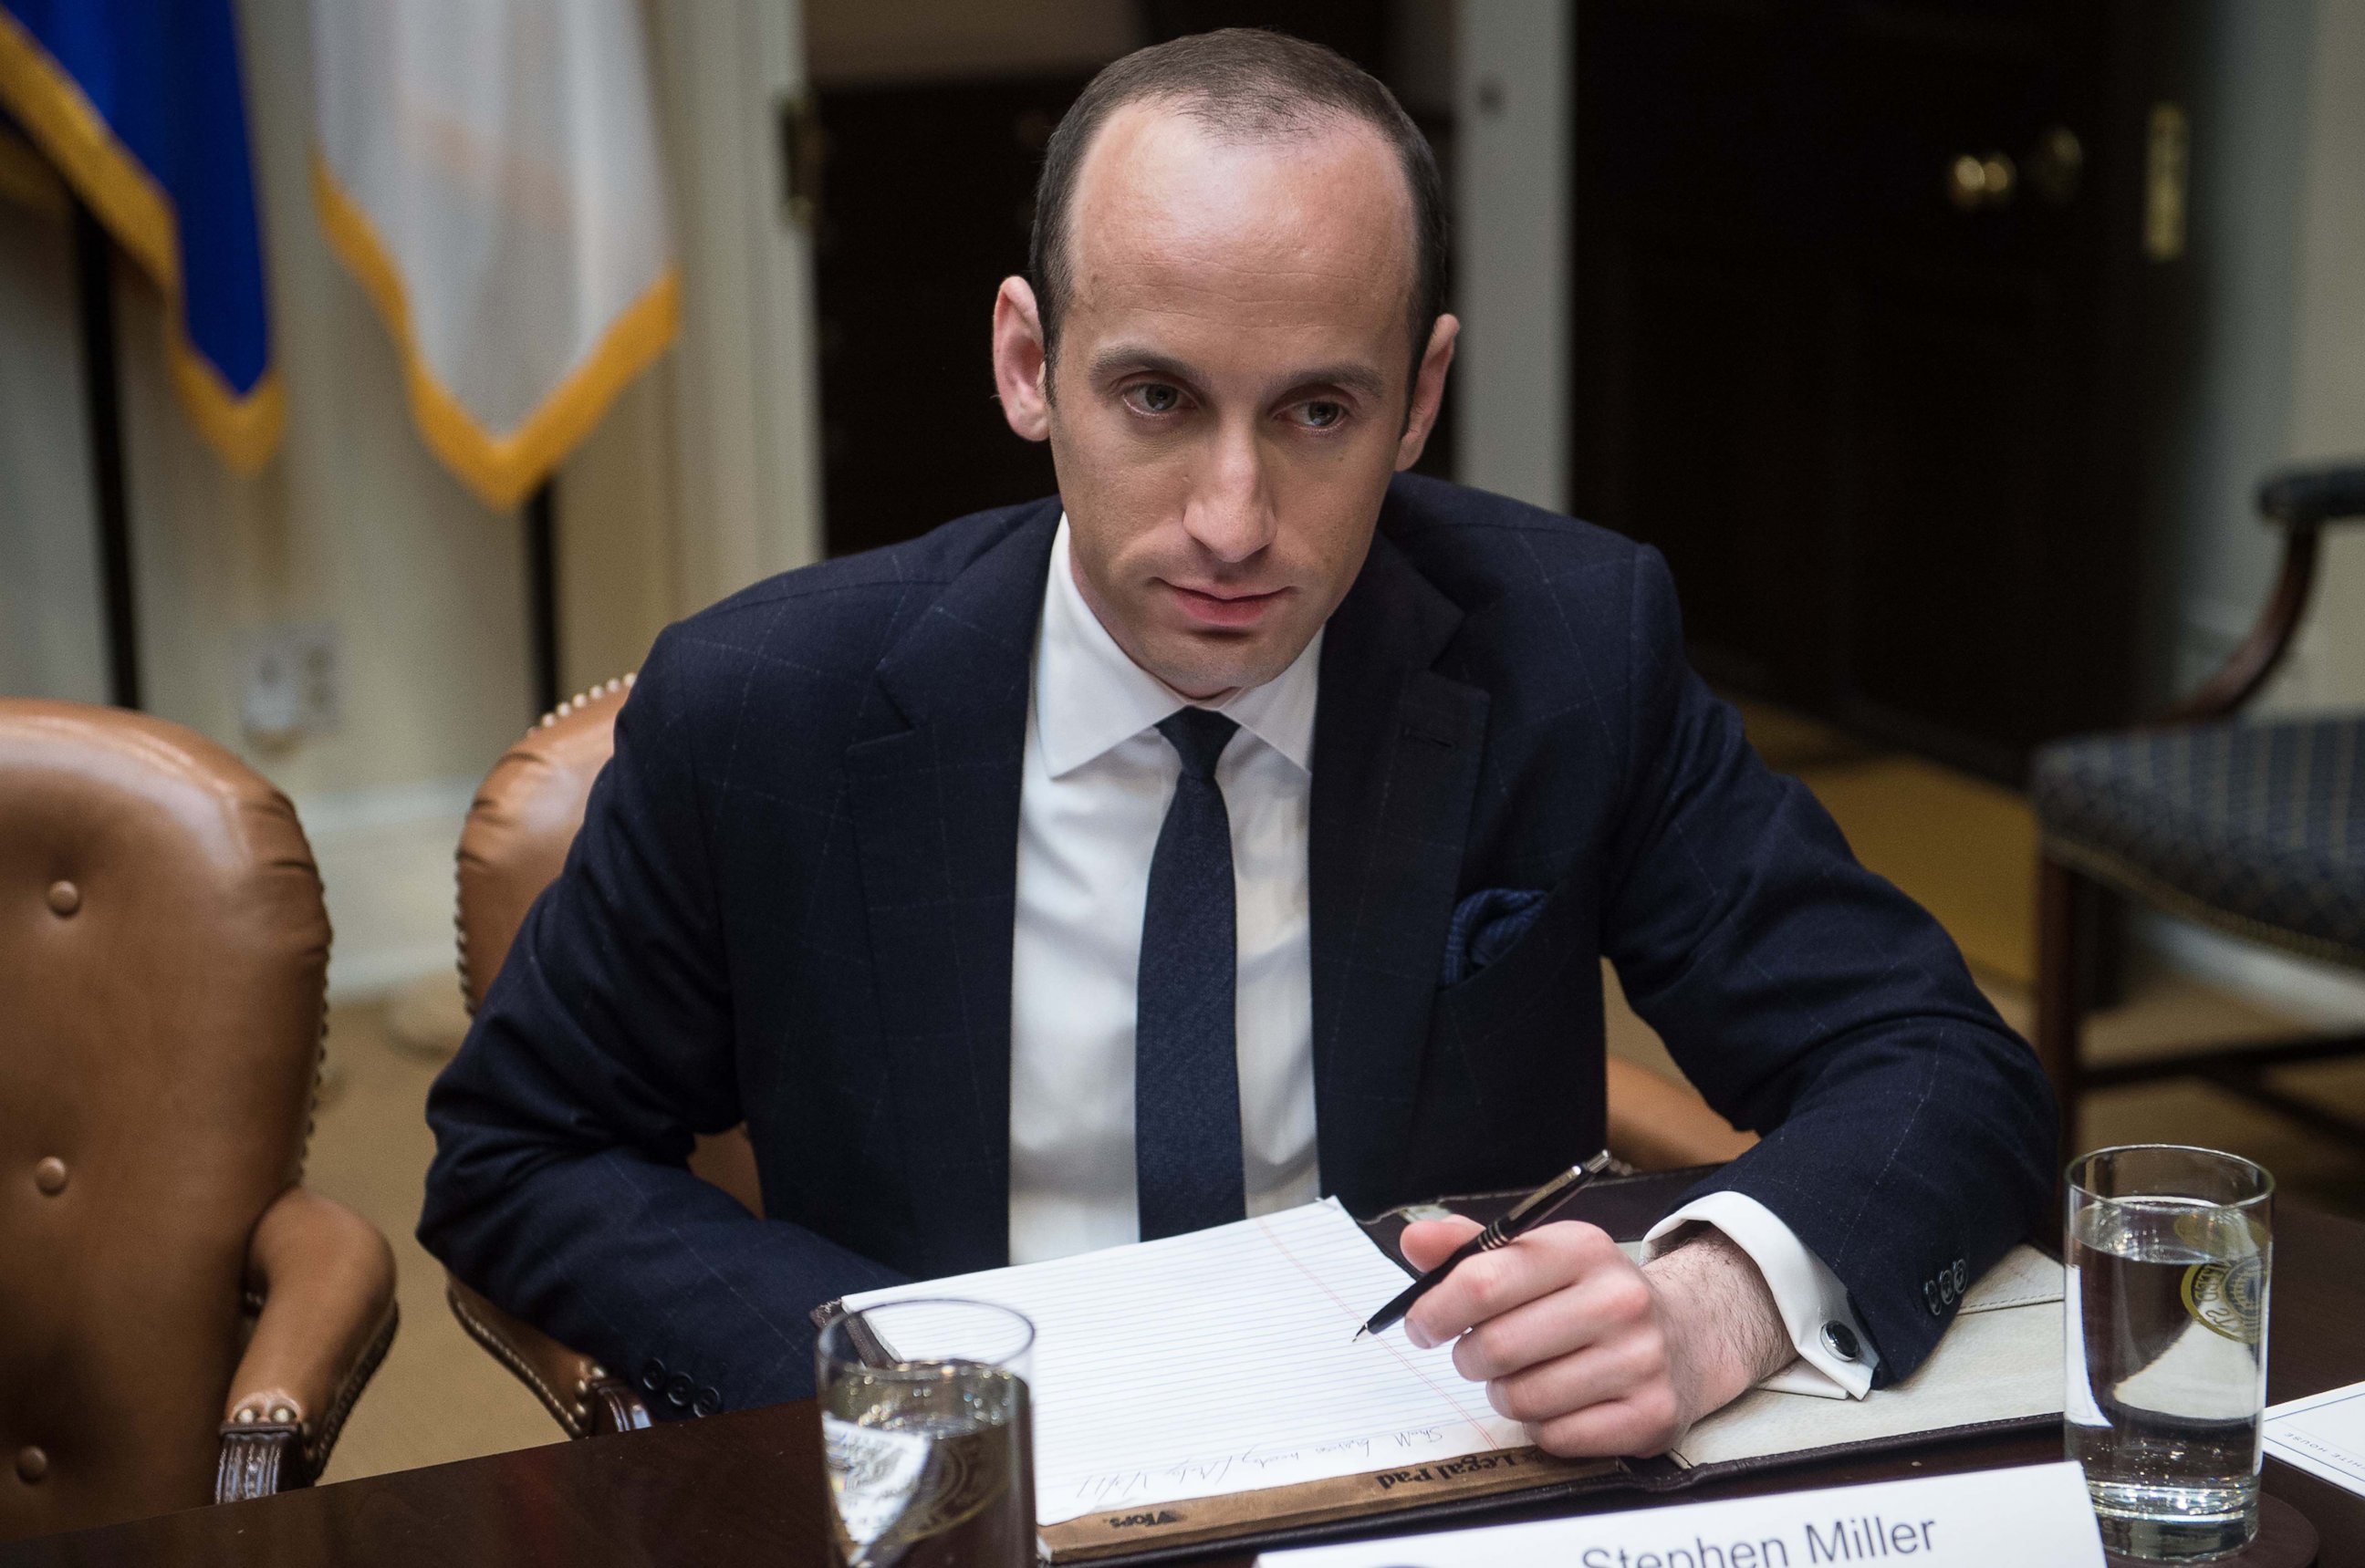 PHOTO: White House Senior Adviser Stephen Miller attends a meeting with President Donald Trump and small business leaders in the Roosevelt Room at the White House, Jan. 30, 2017 in Washington, D.C.